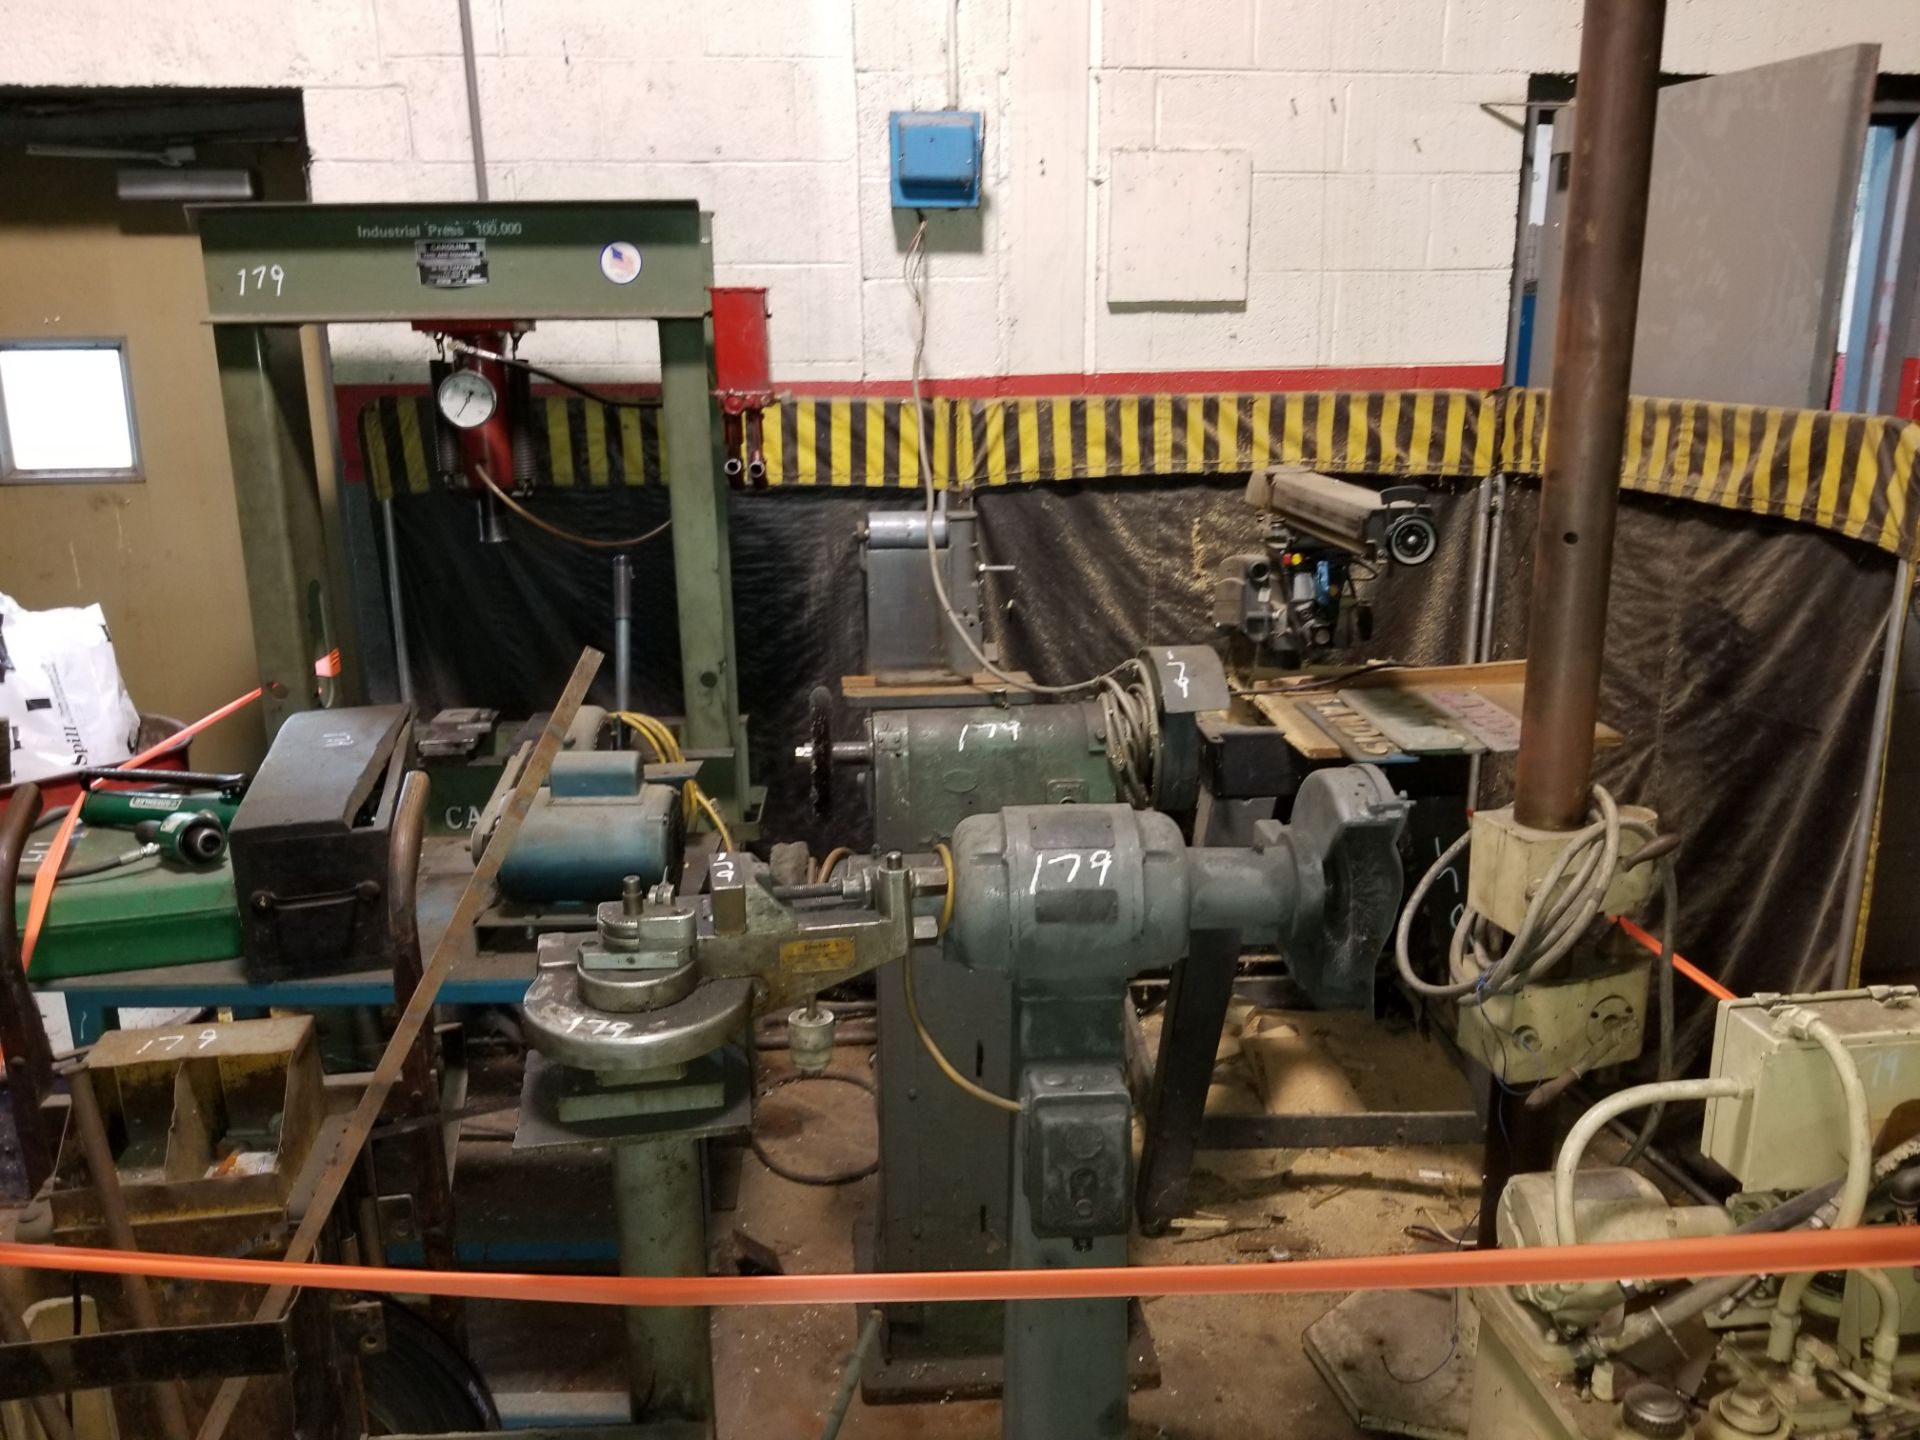 Industrial Press, Grinding Machines, Radial Arm Saw, Hydraulic Tank and More - Image 2 of 4